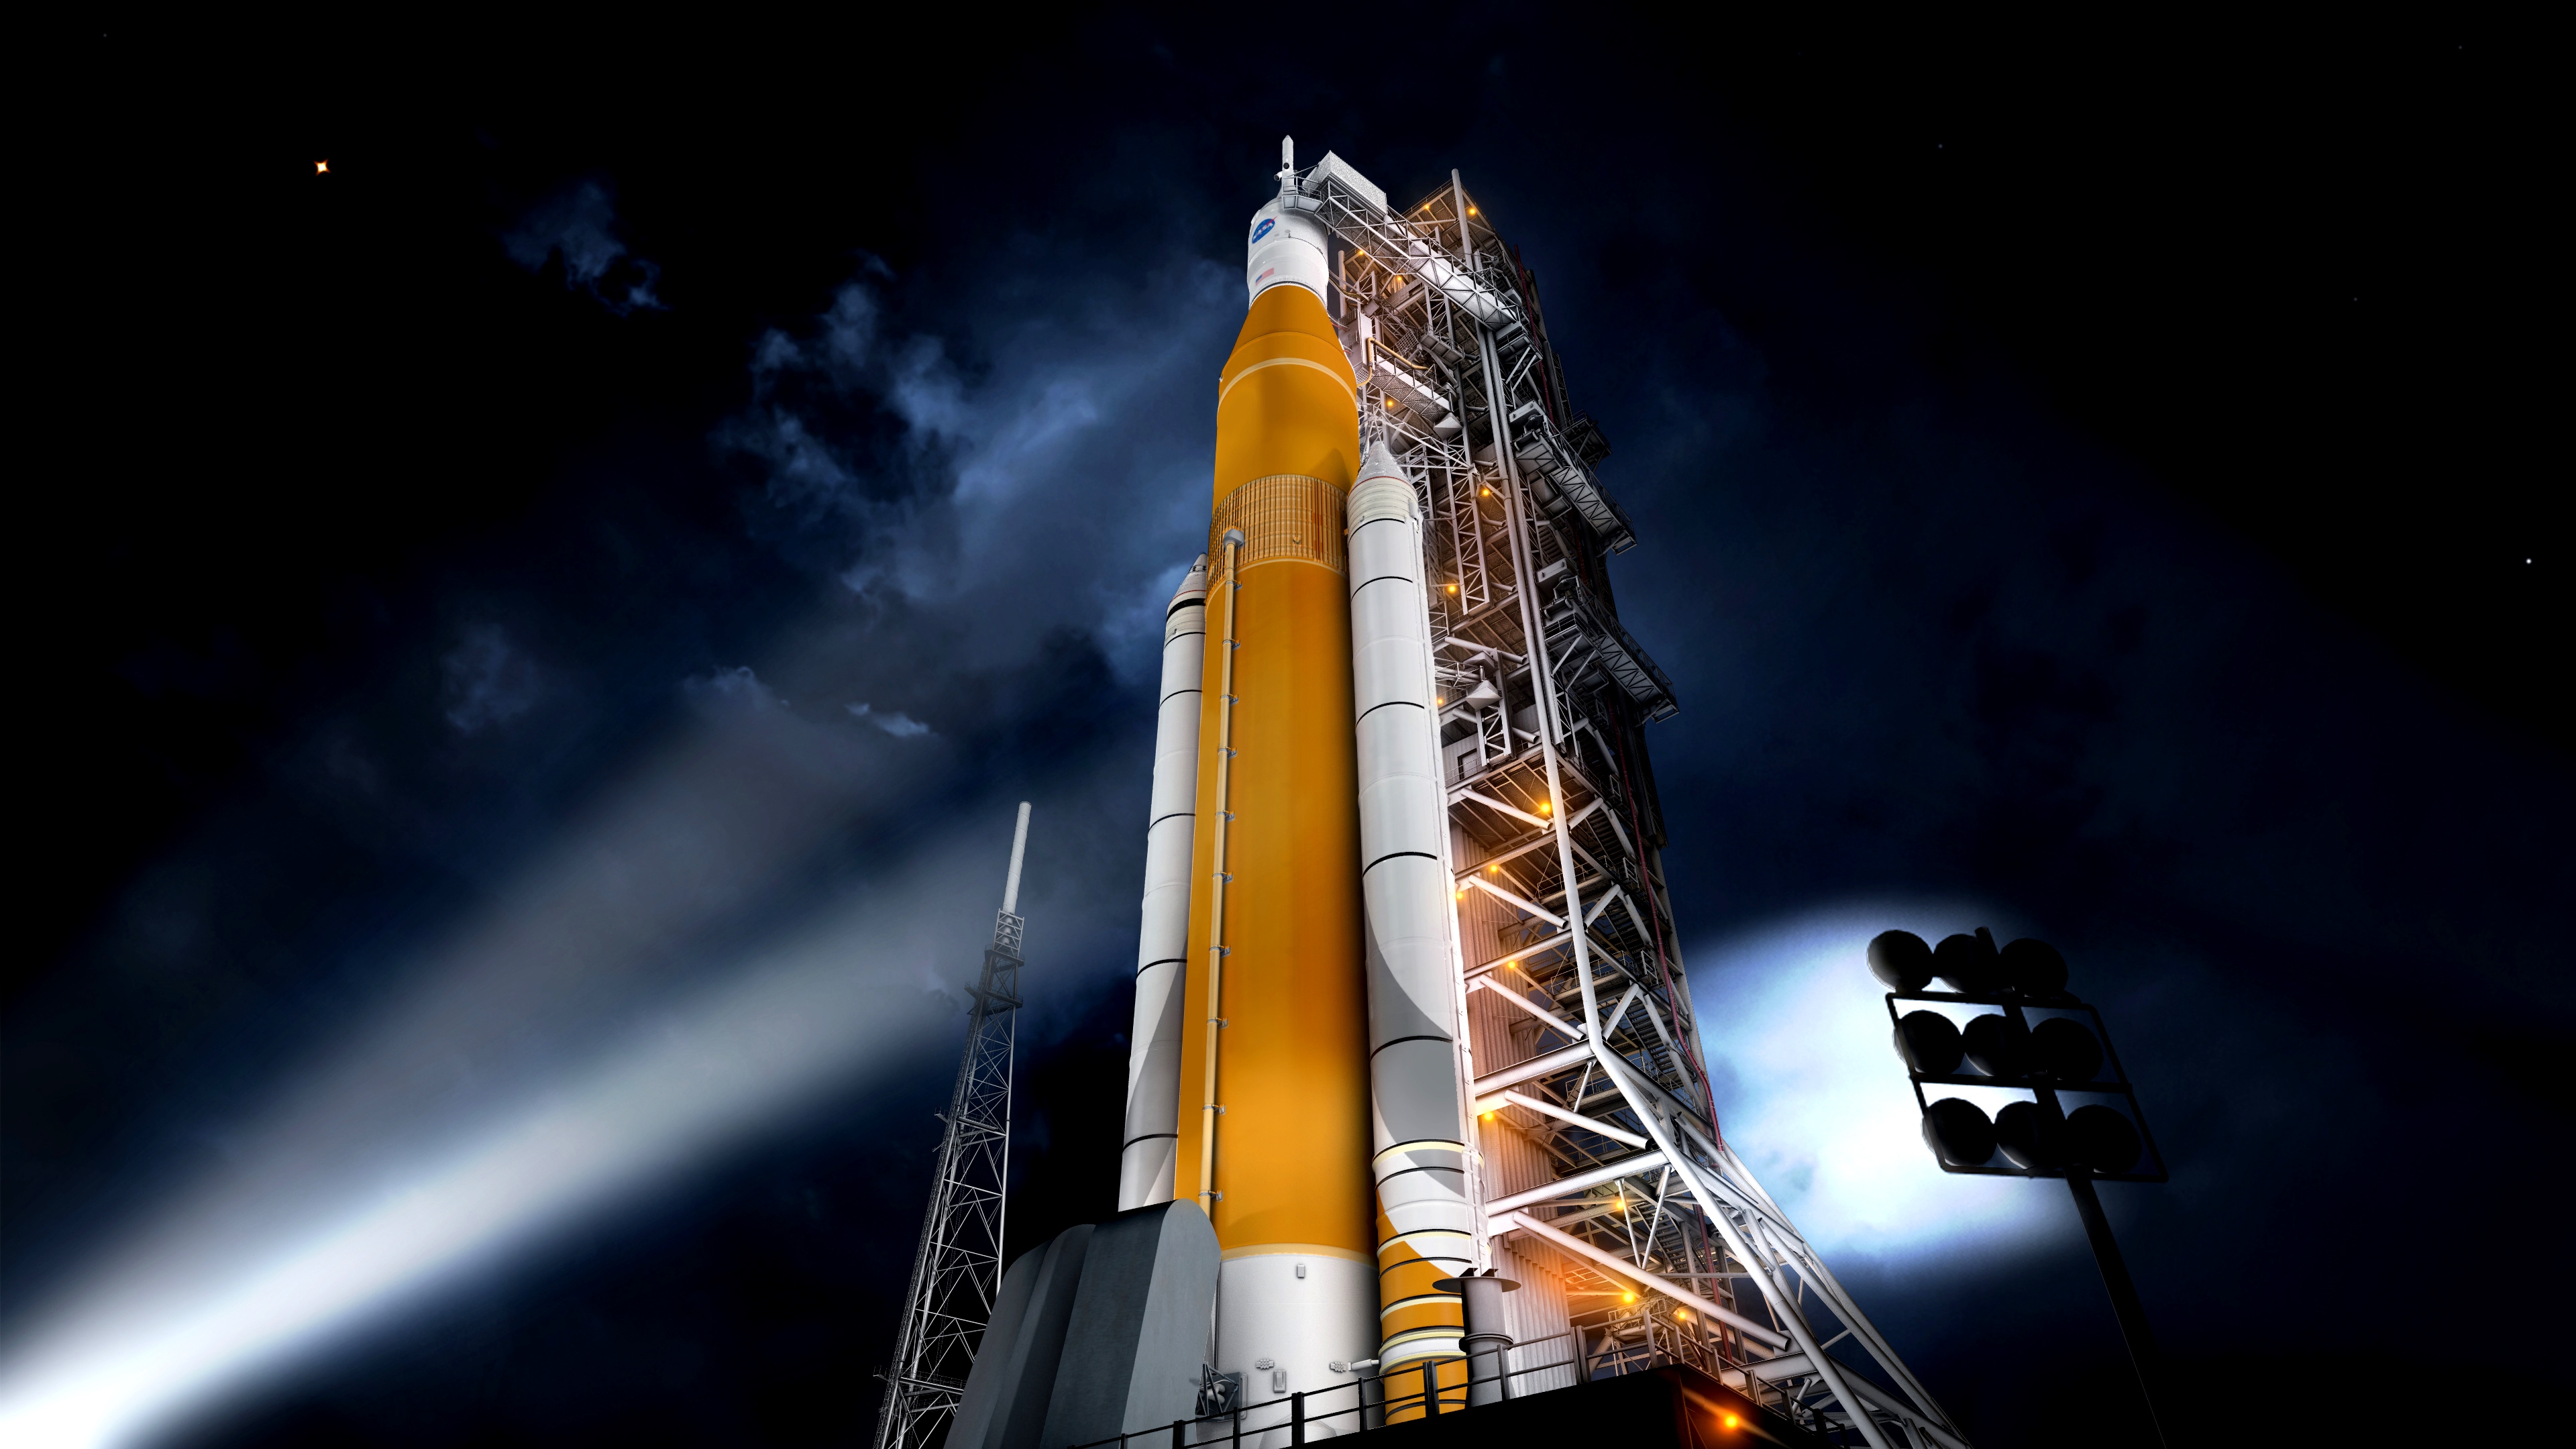 Artist's illustration of NASA's huge Space Launch System rocket on the launch pad.